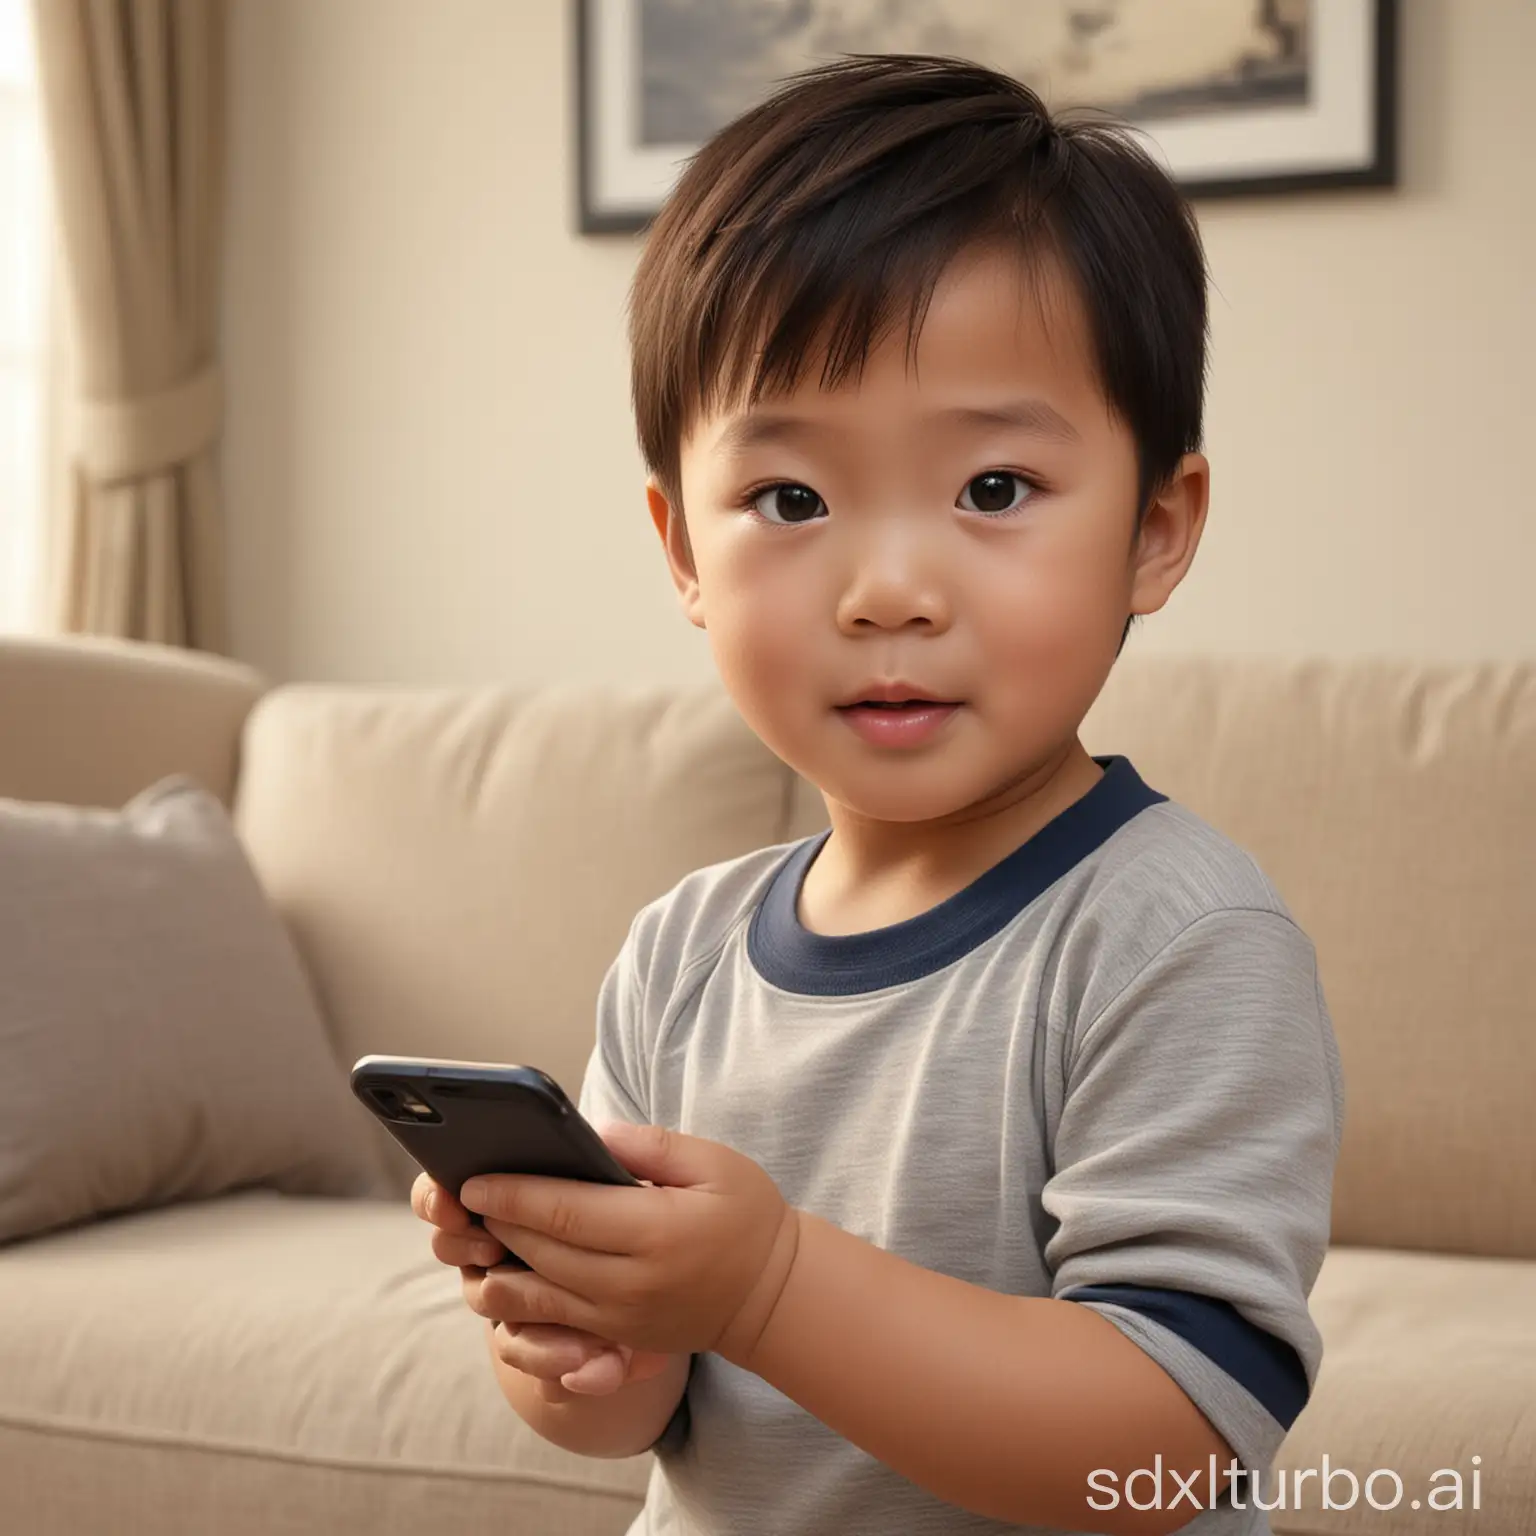 Here's the image of a handsome five-year-old Chinese boy, depicted in a realistic living roomsetting as he eaqerlyreaches forasmartphone.